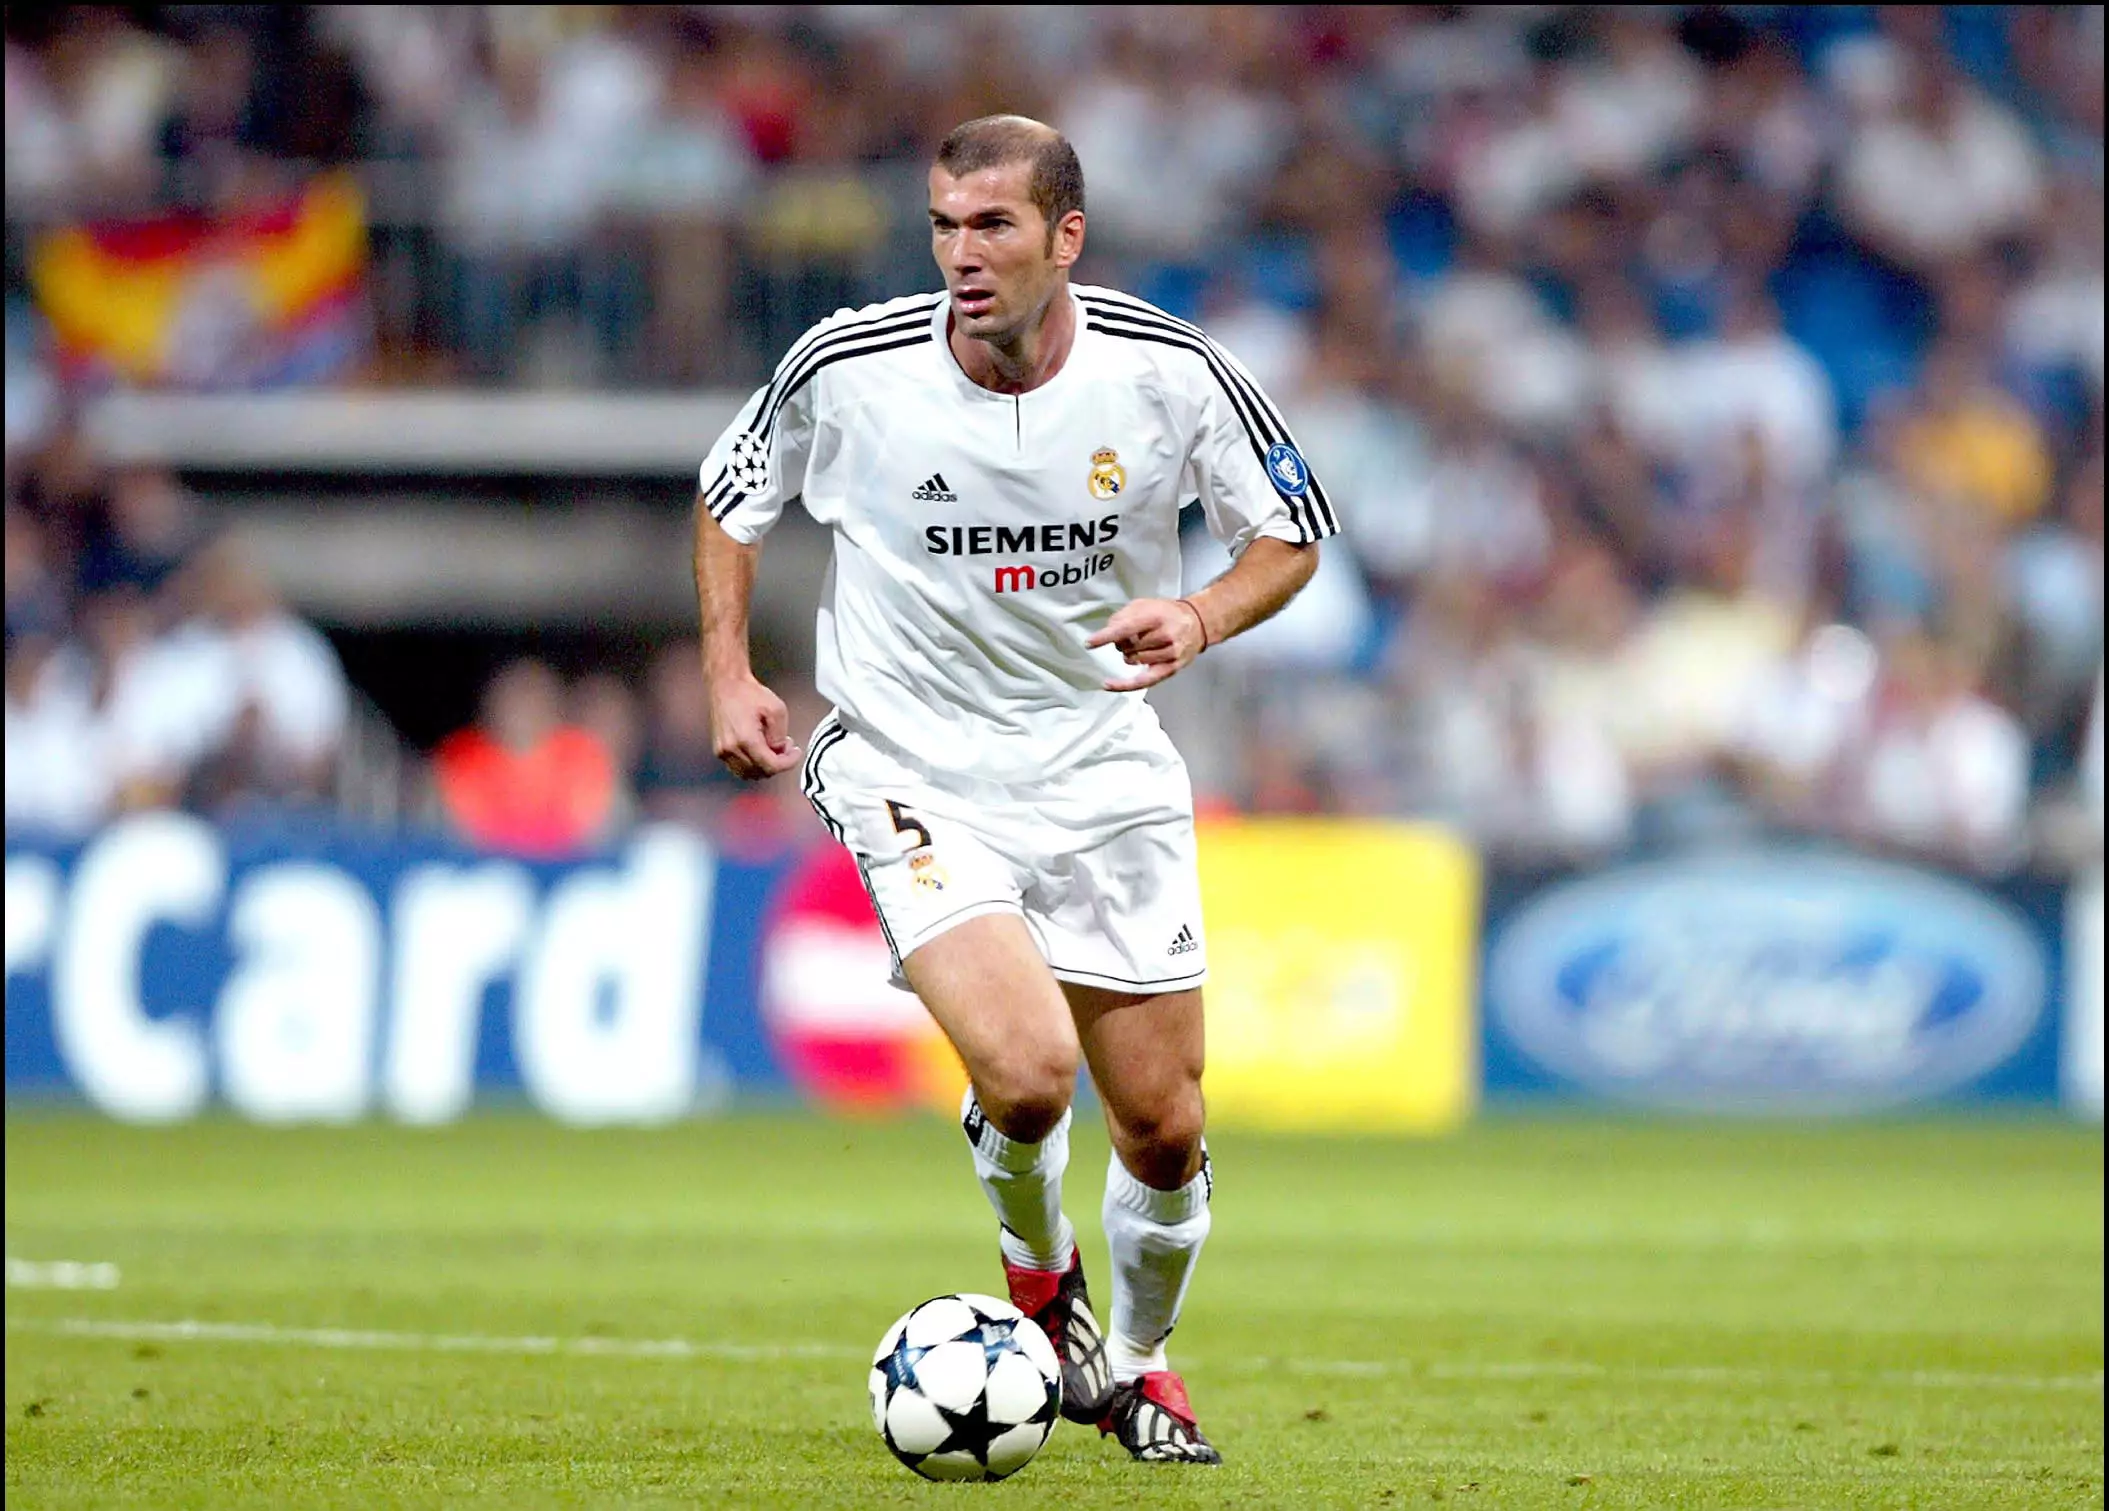 Zidane in action for Real Madrid. Image: PA